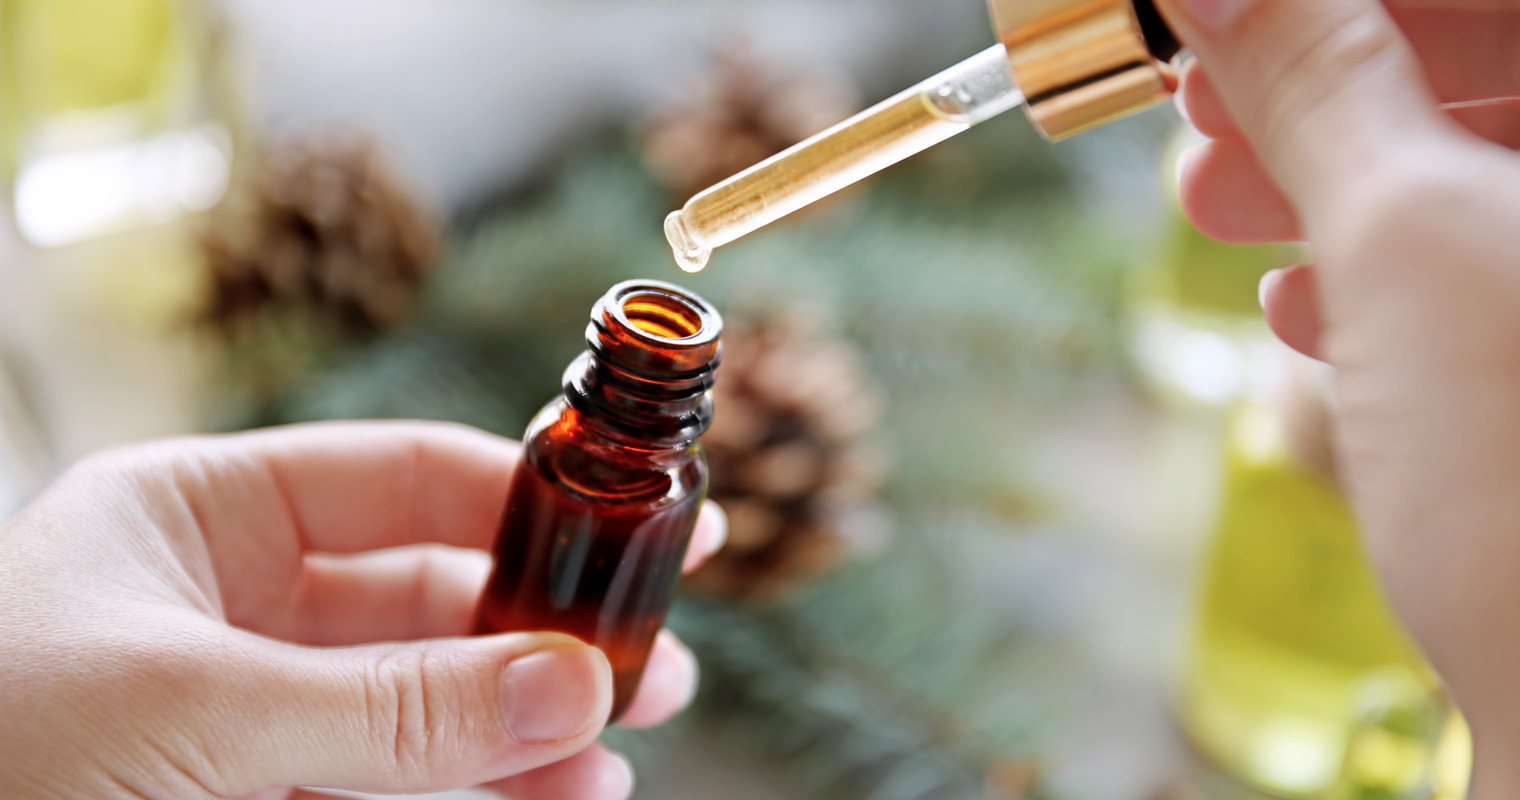 extracting essential oil using a dropper from a bottle